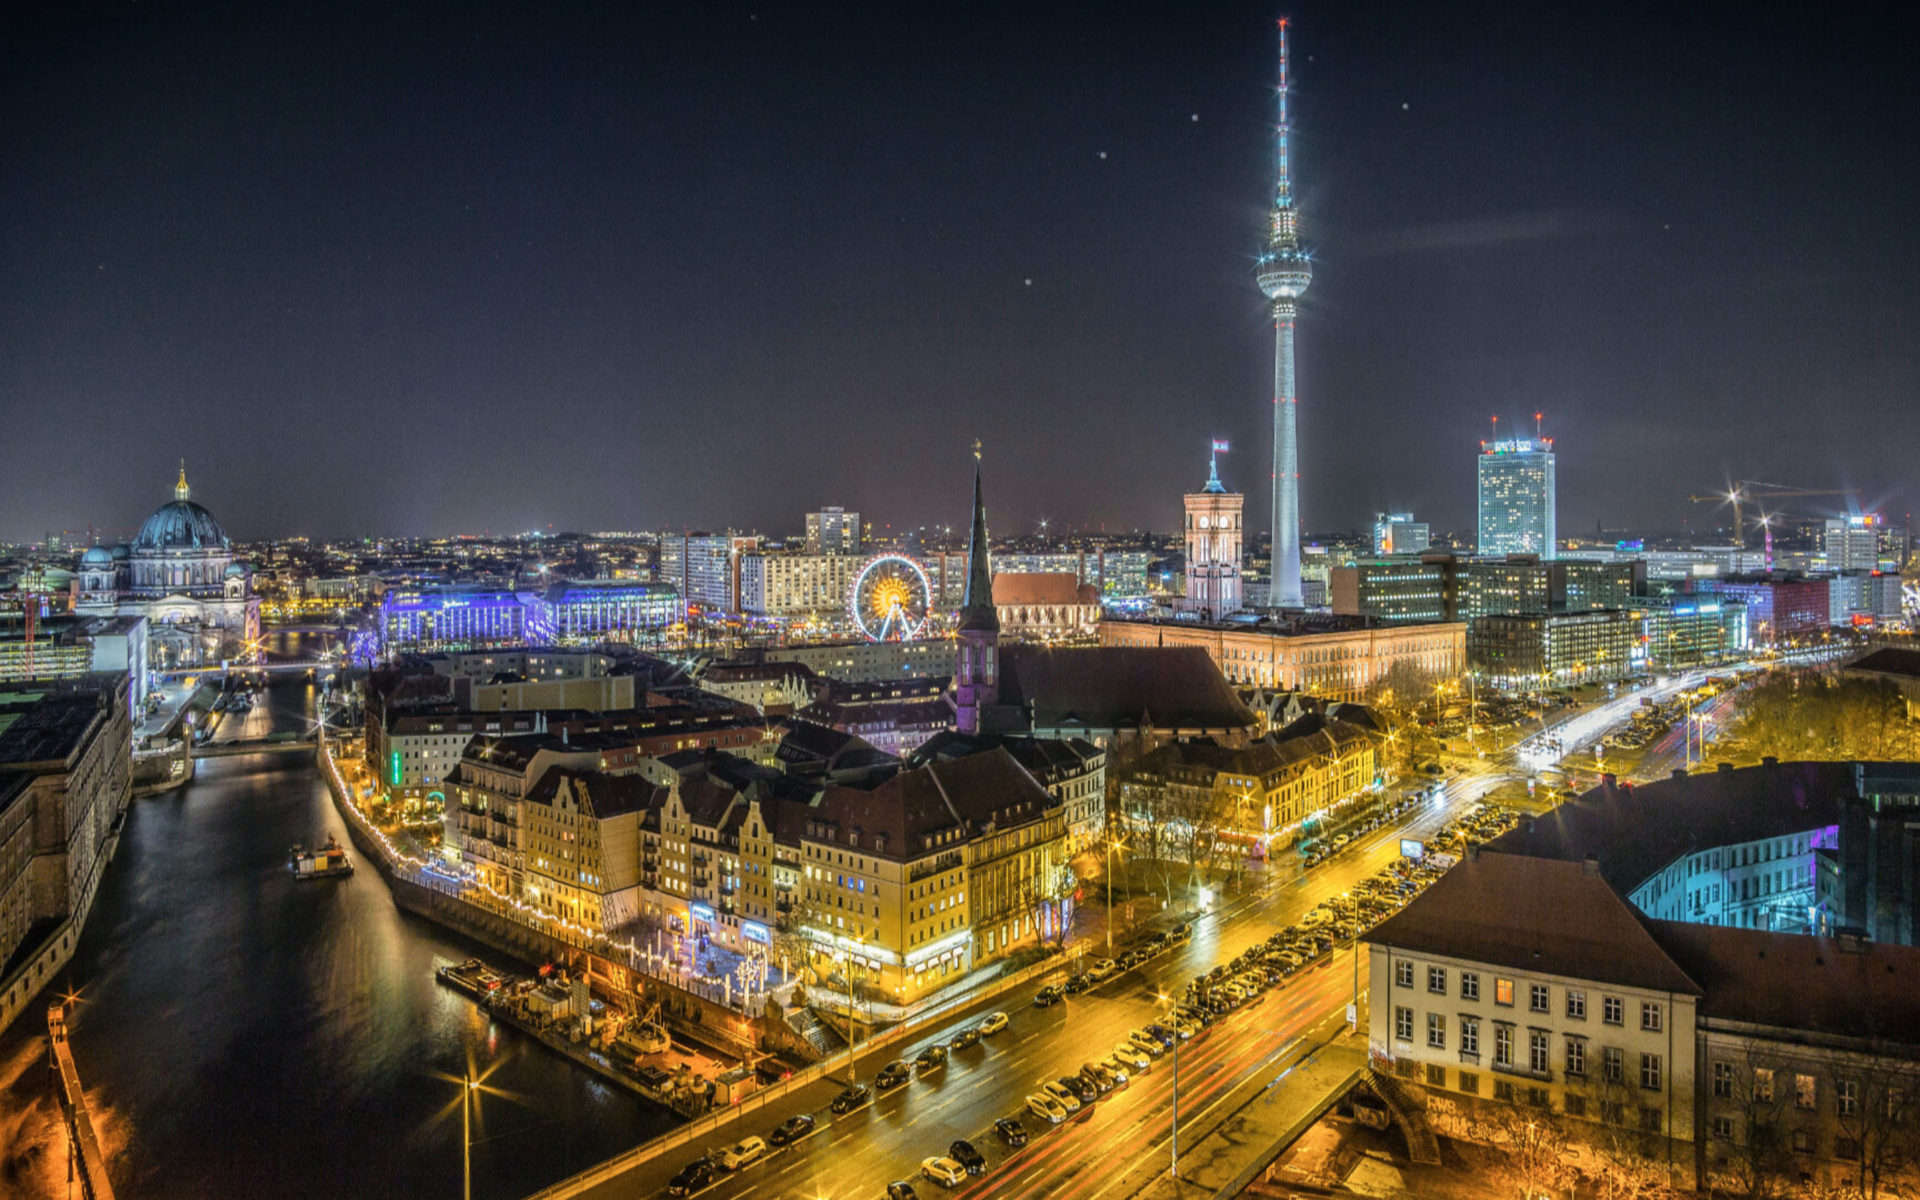 Berlin In Night Major And The Largest City Of Germany Best HD Desktop Wallpaper For Tablets And Mobile Phones Free Download 3840x2160, Wallpaper13.com